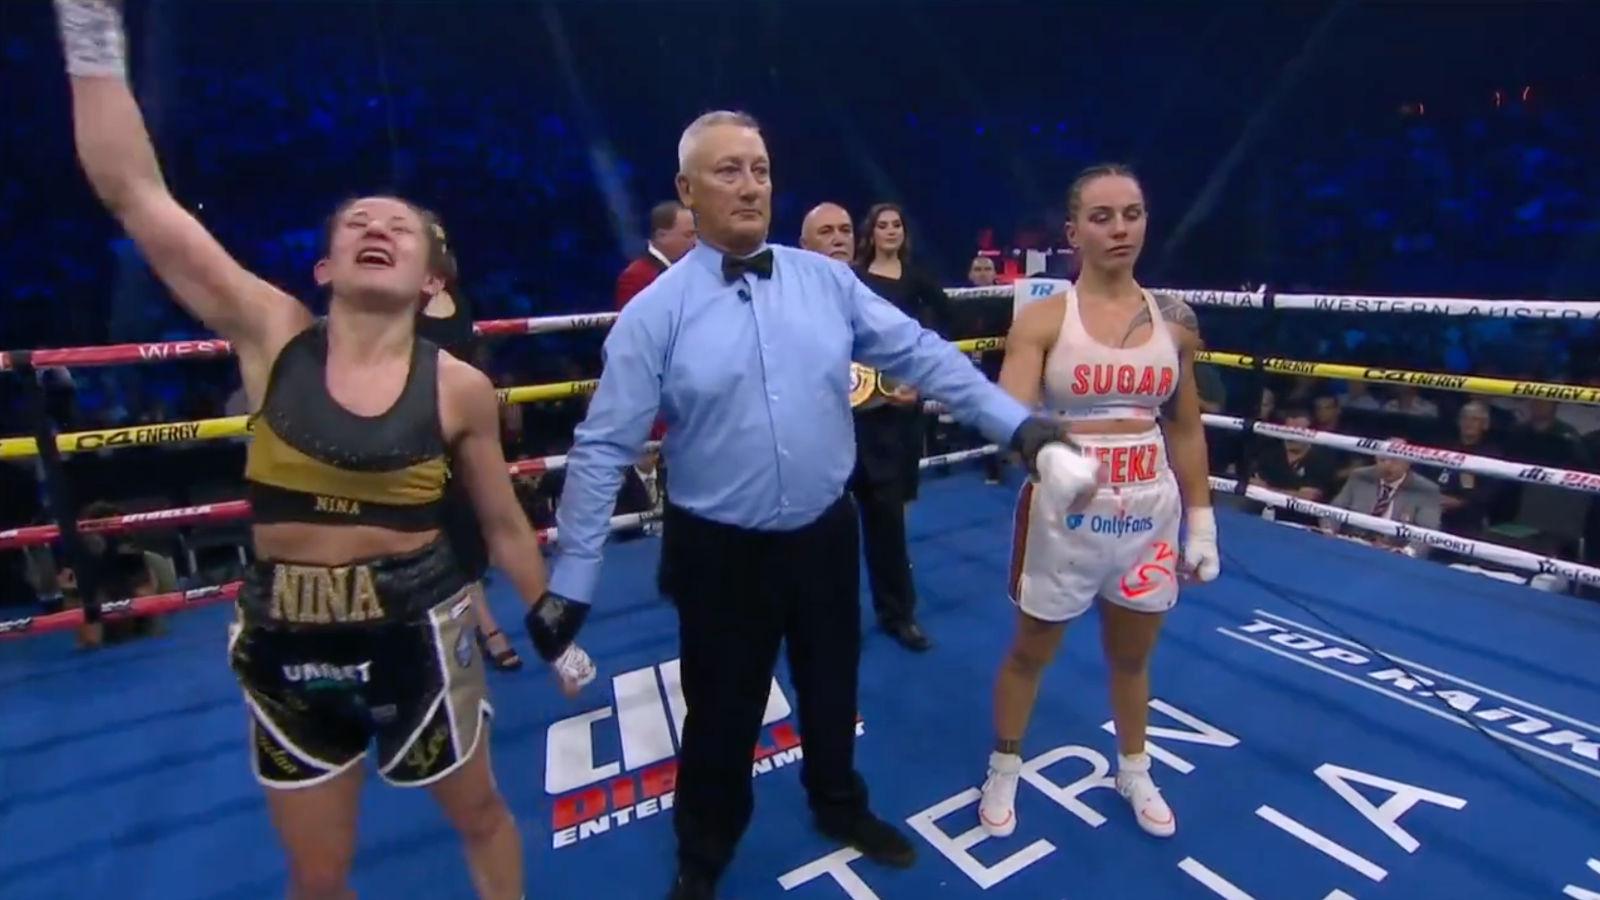 British boxer Nina Hughes is incorrectly announced as the winner of her fight against Cherneka Johnson